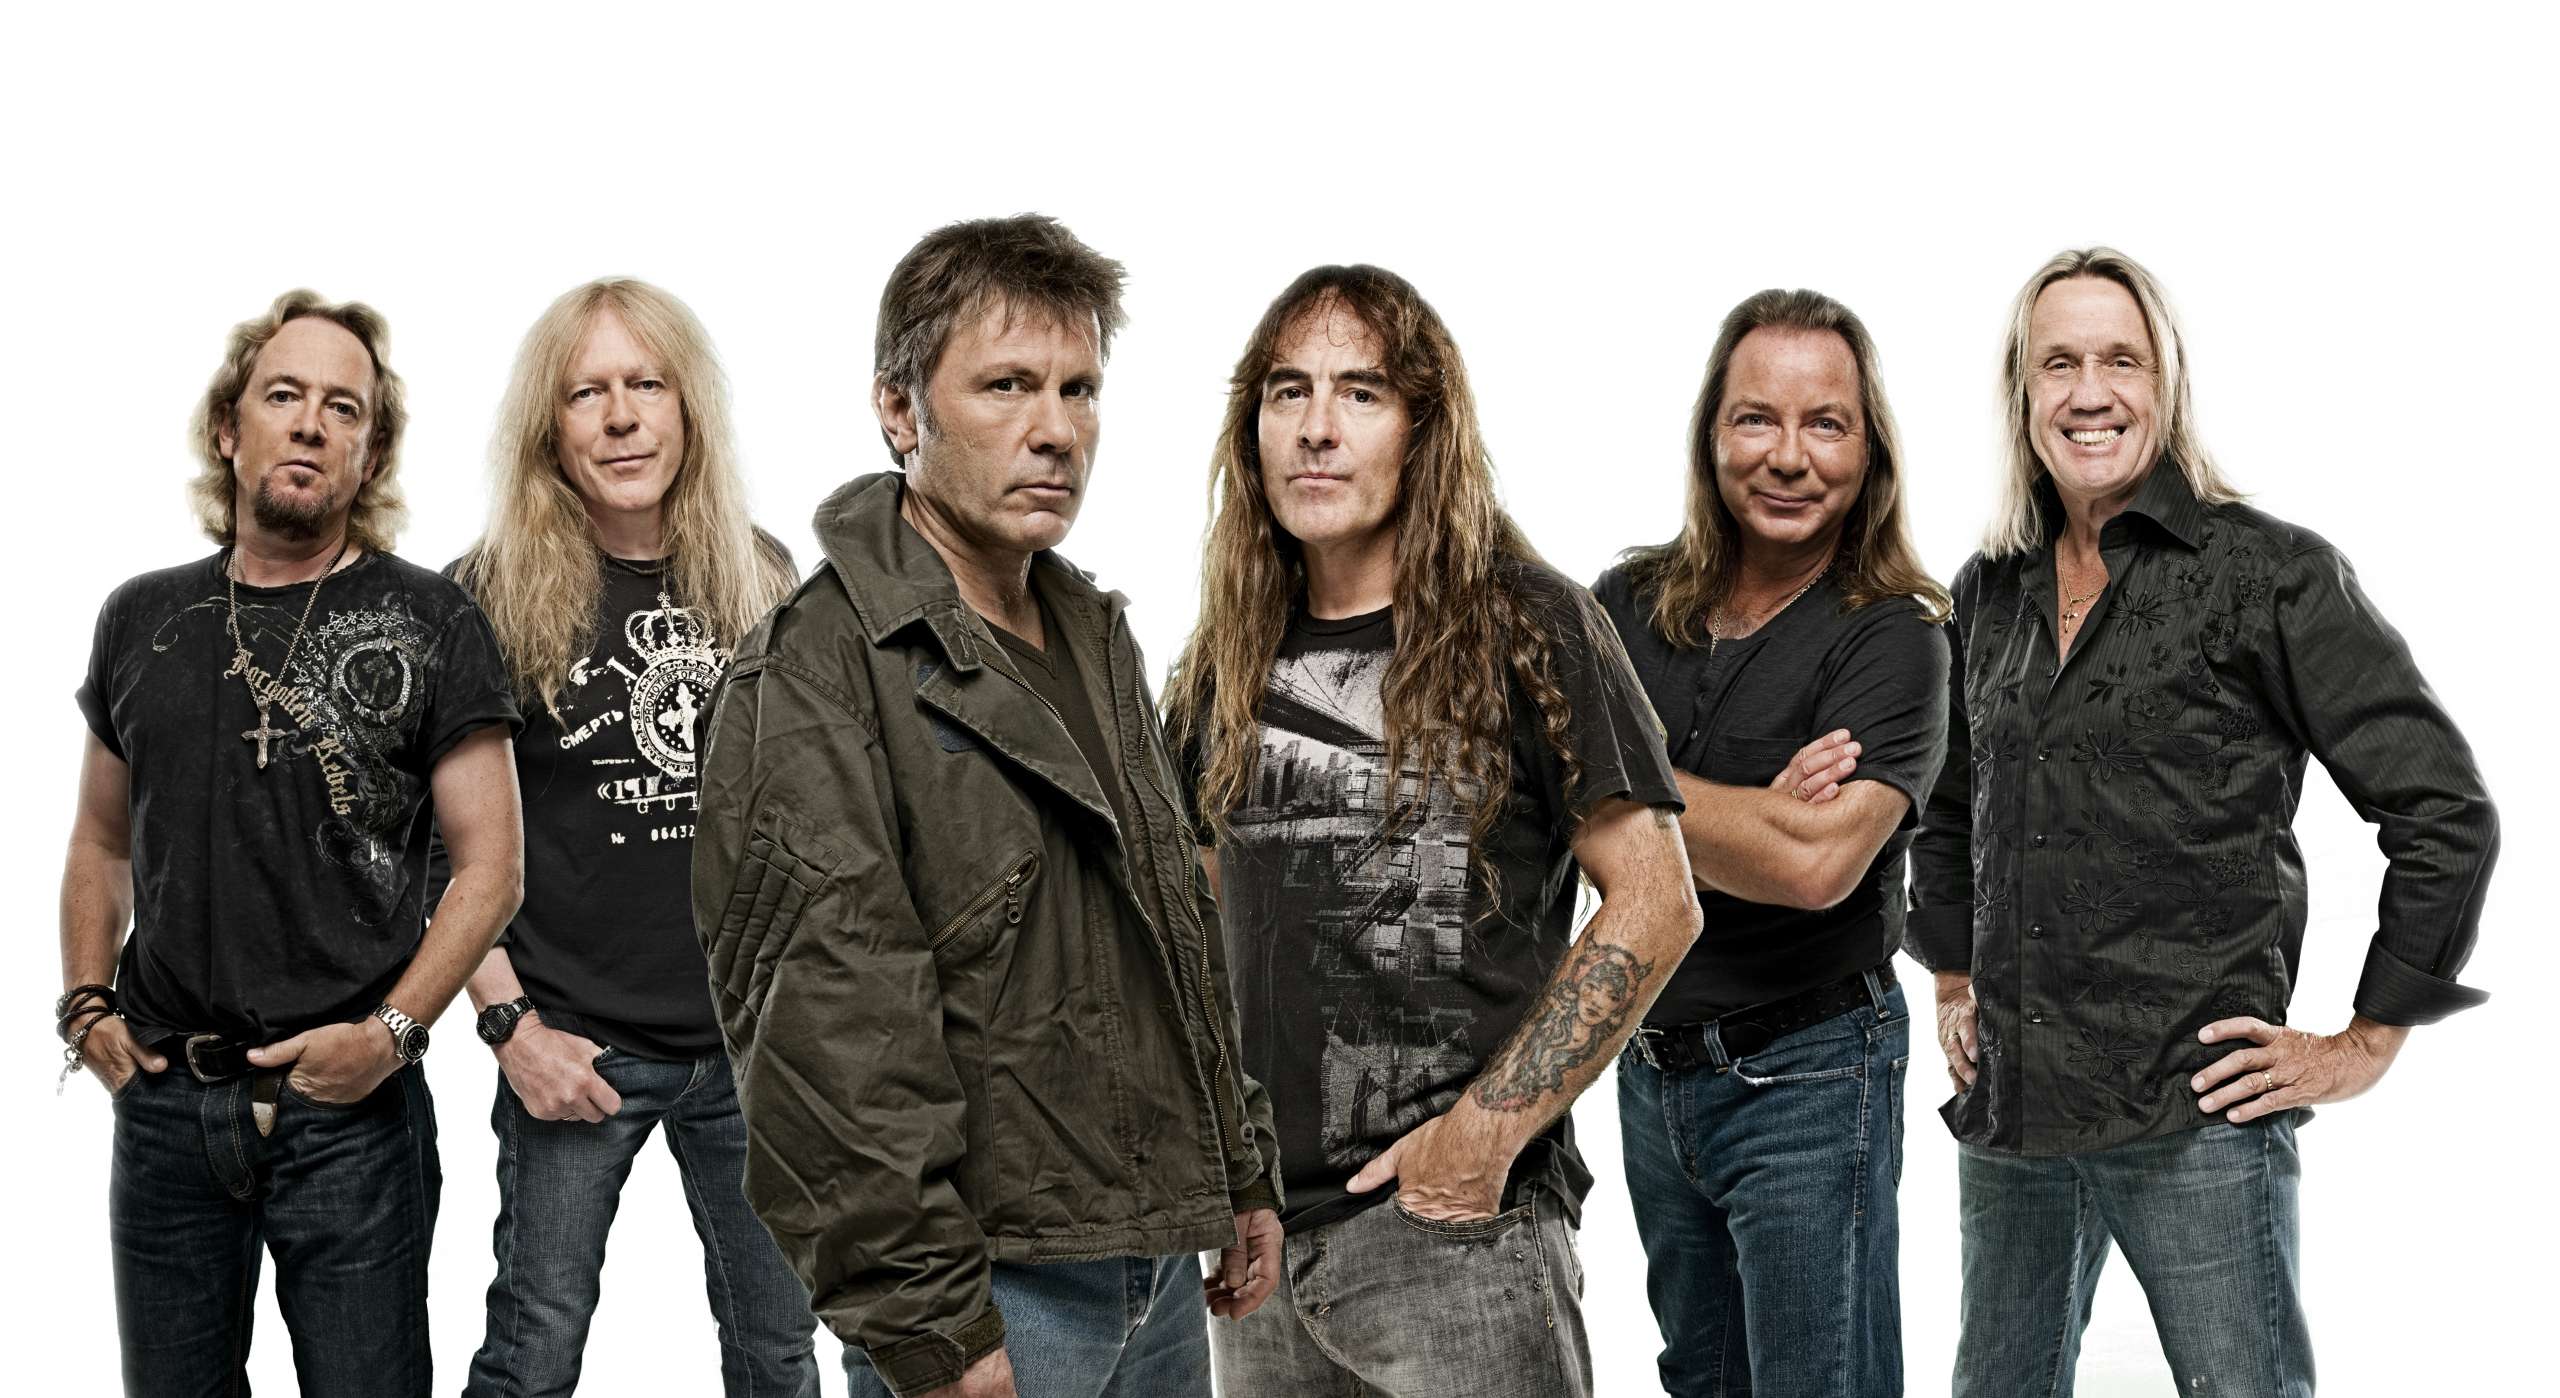 IRON MAIDEN – annunciano l’uscita di The Number of the Beast + Beast Over Hammersmith